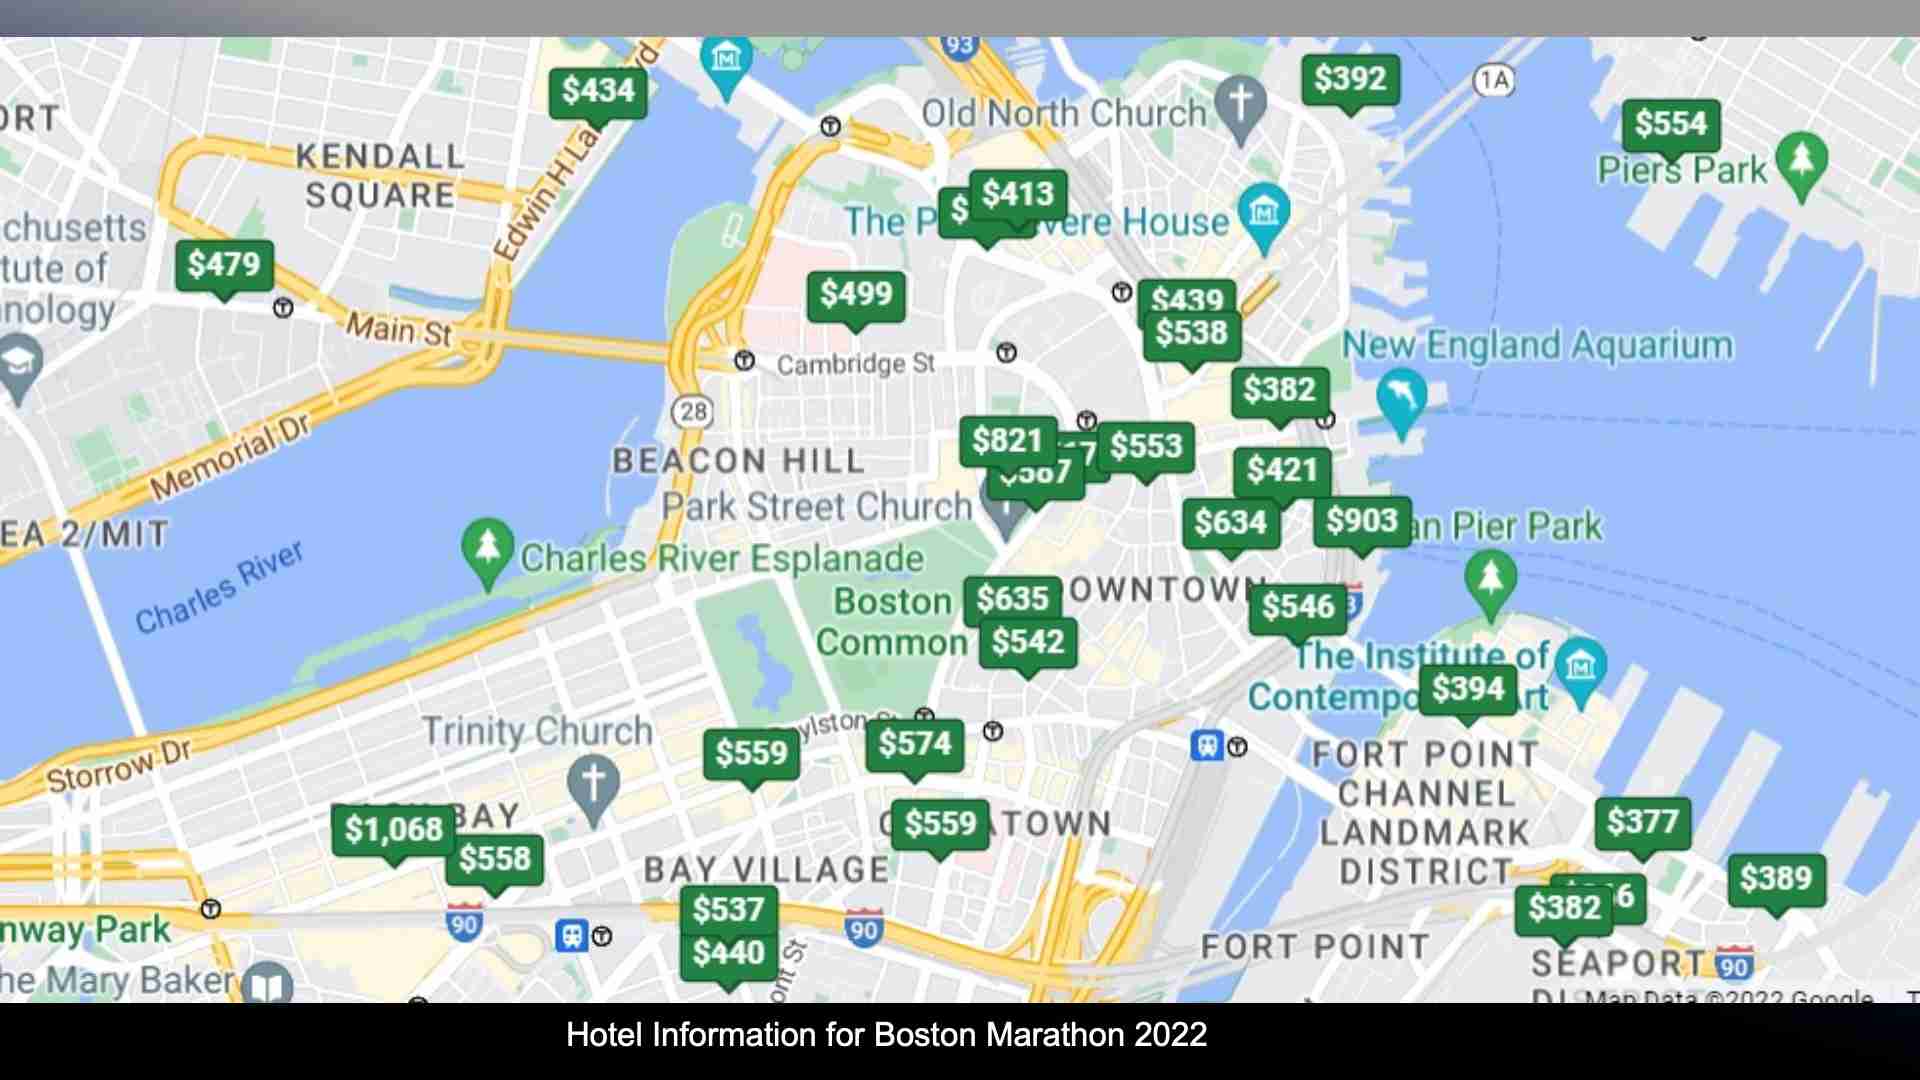 Hotel rooms still available for Boston Marathon 2022, but at a price